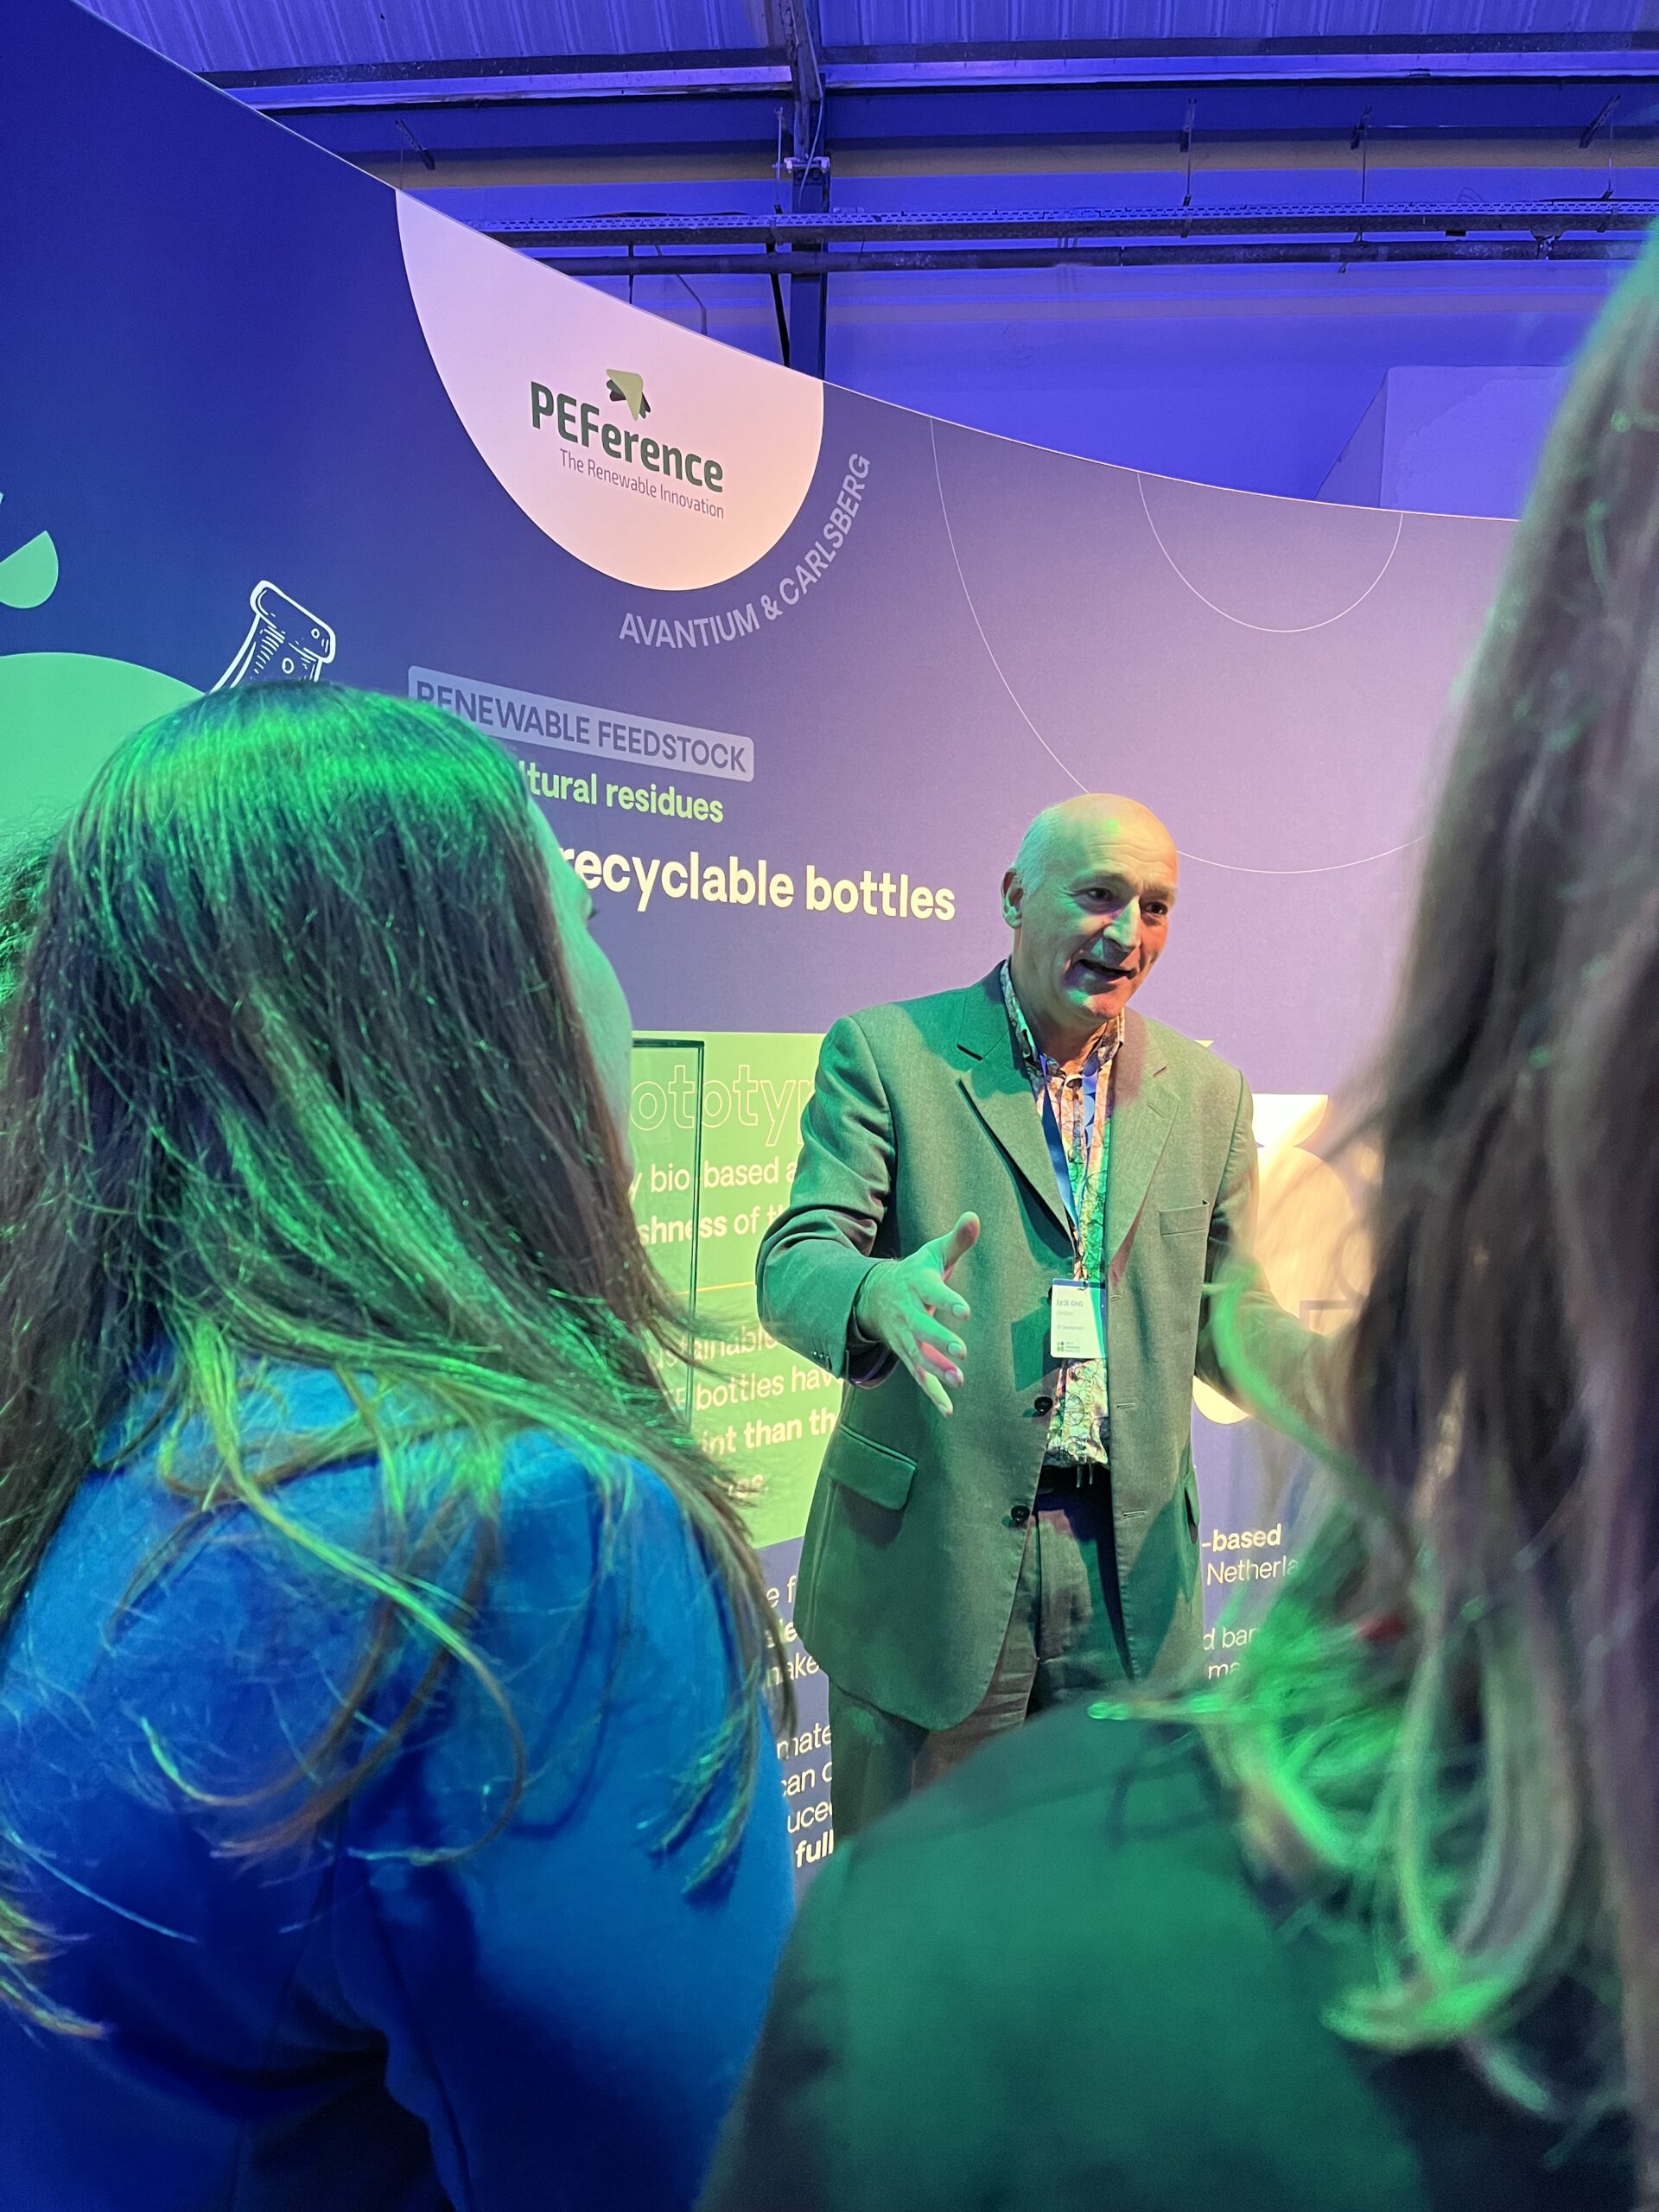 Ed de Jong opens the PEFerence demonstrator display to an interested audience. Green and violet lights. Two long-haired persons visible in the front.